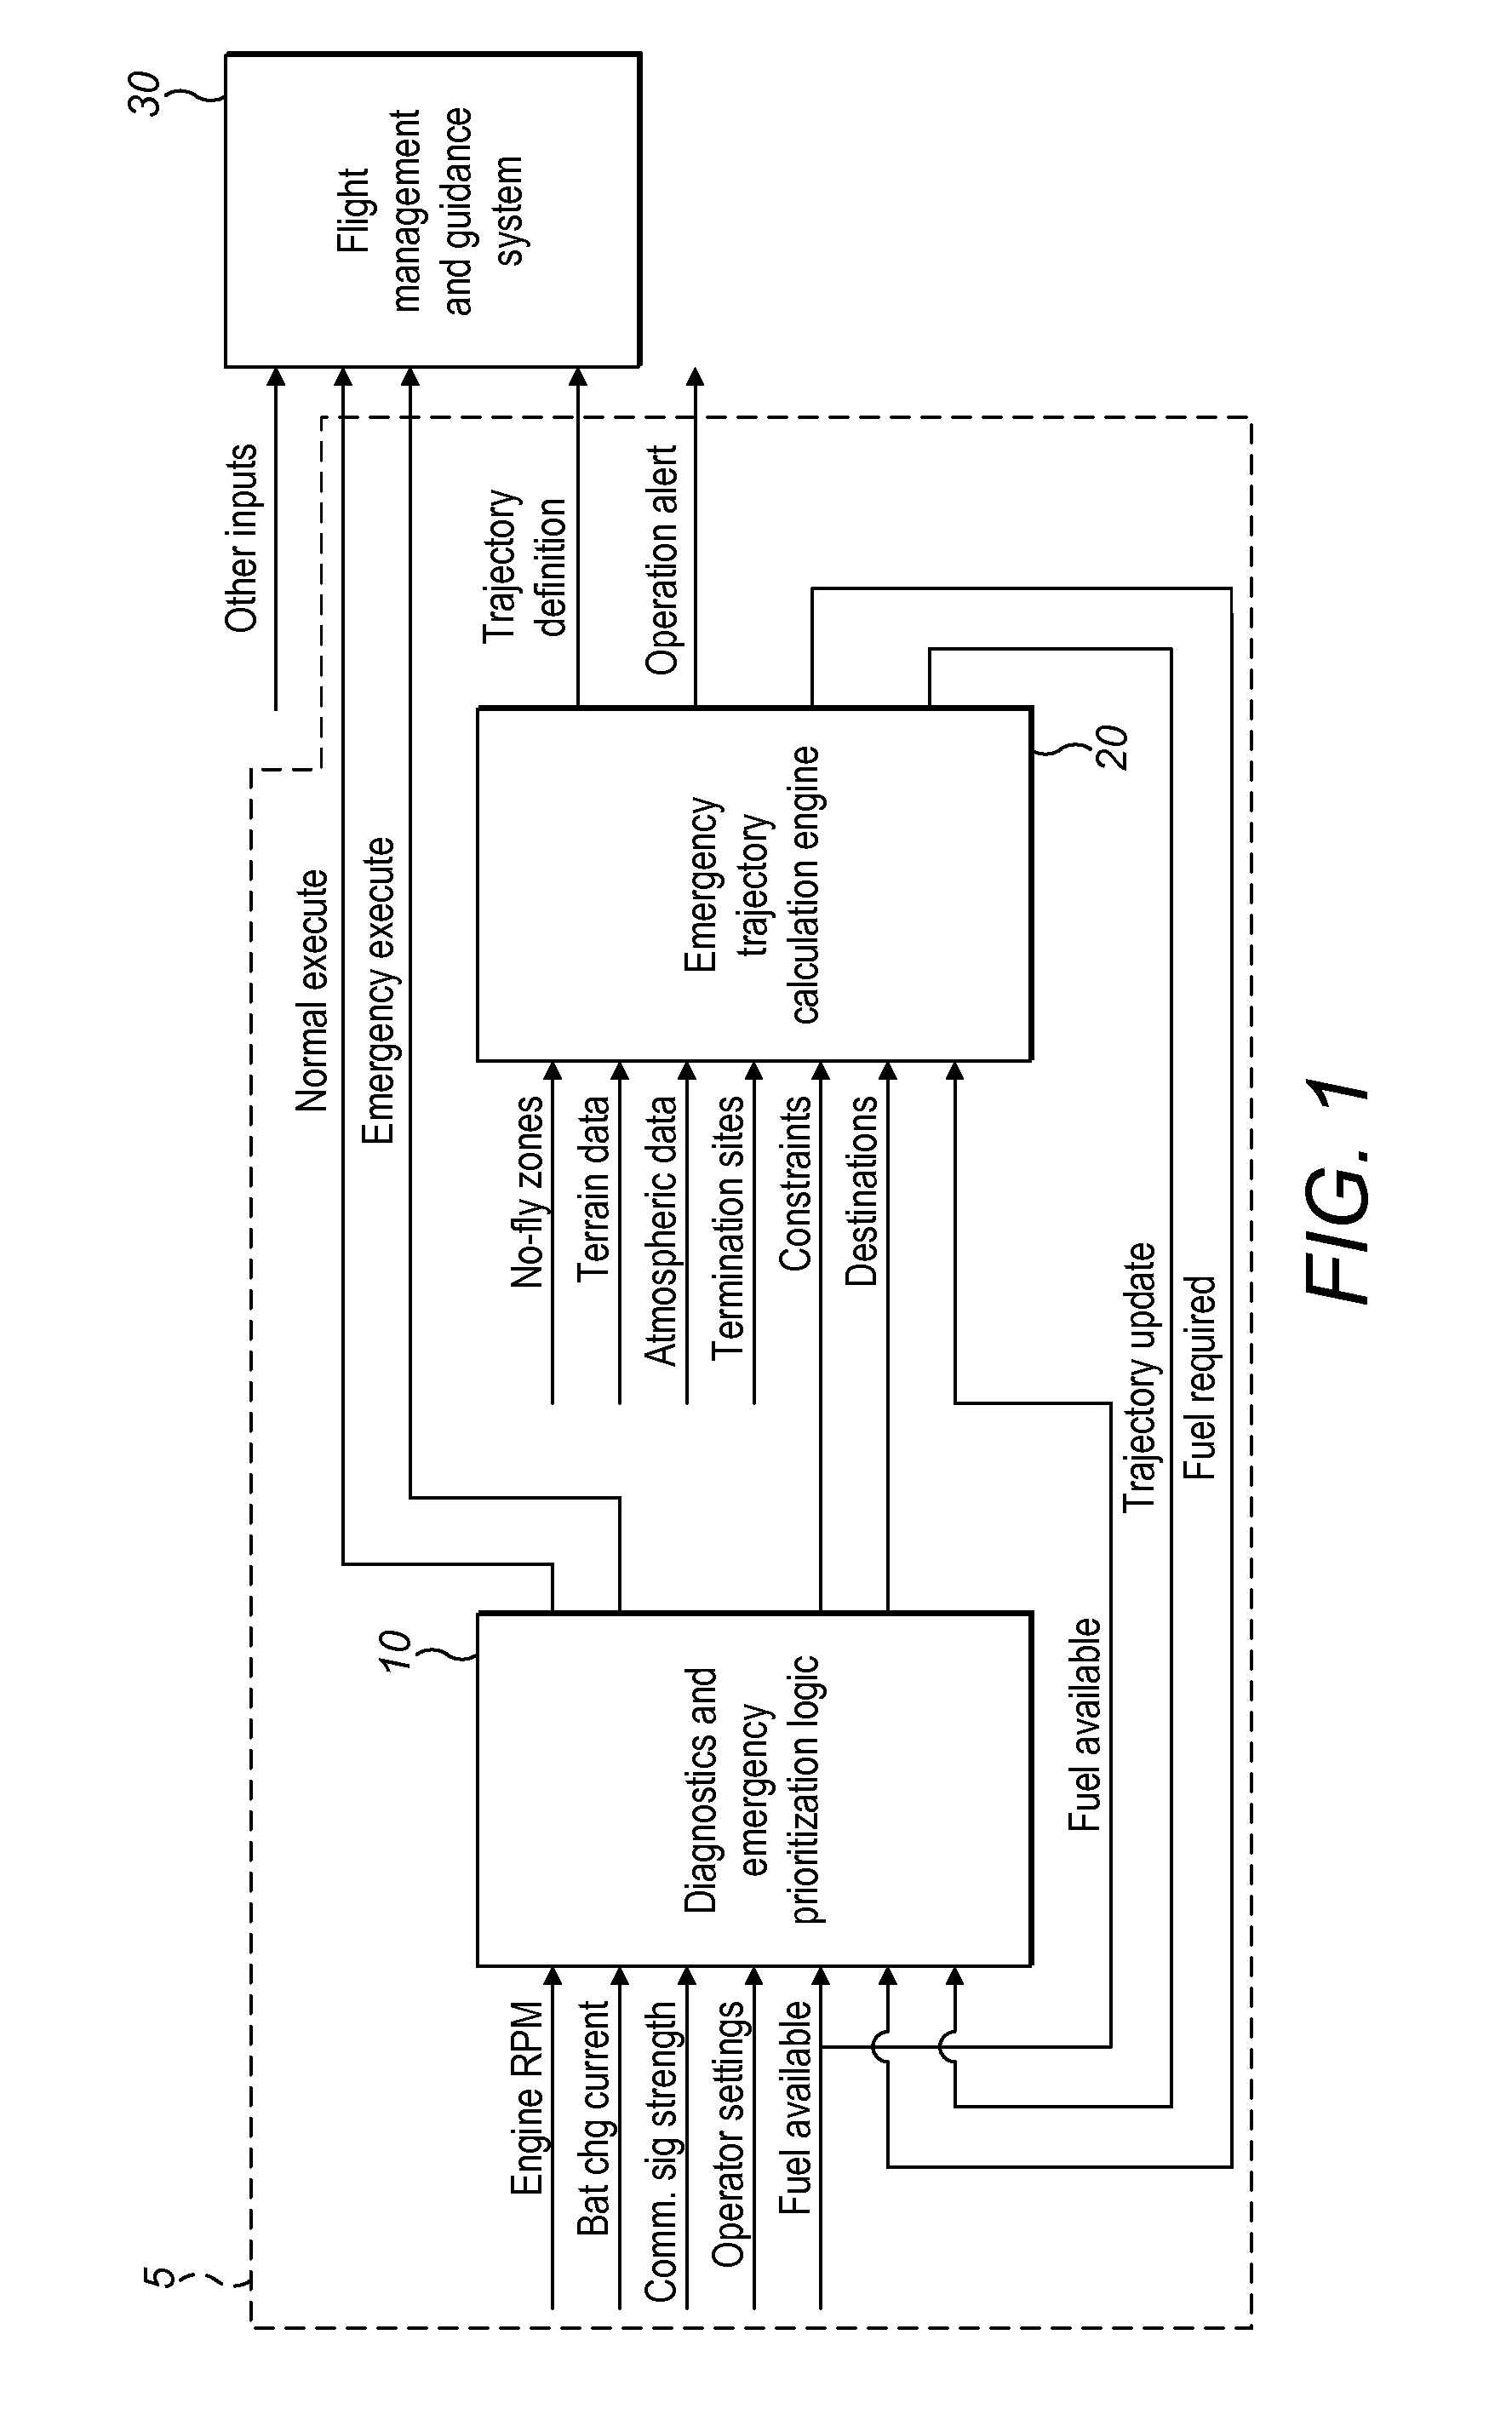 Method of Flying an Unmanned Aerial Vehicle